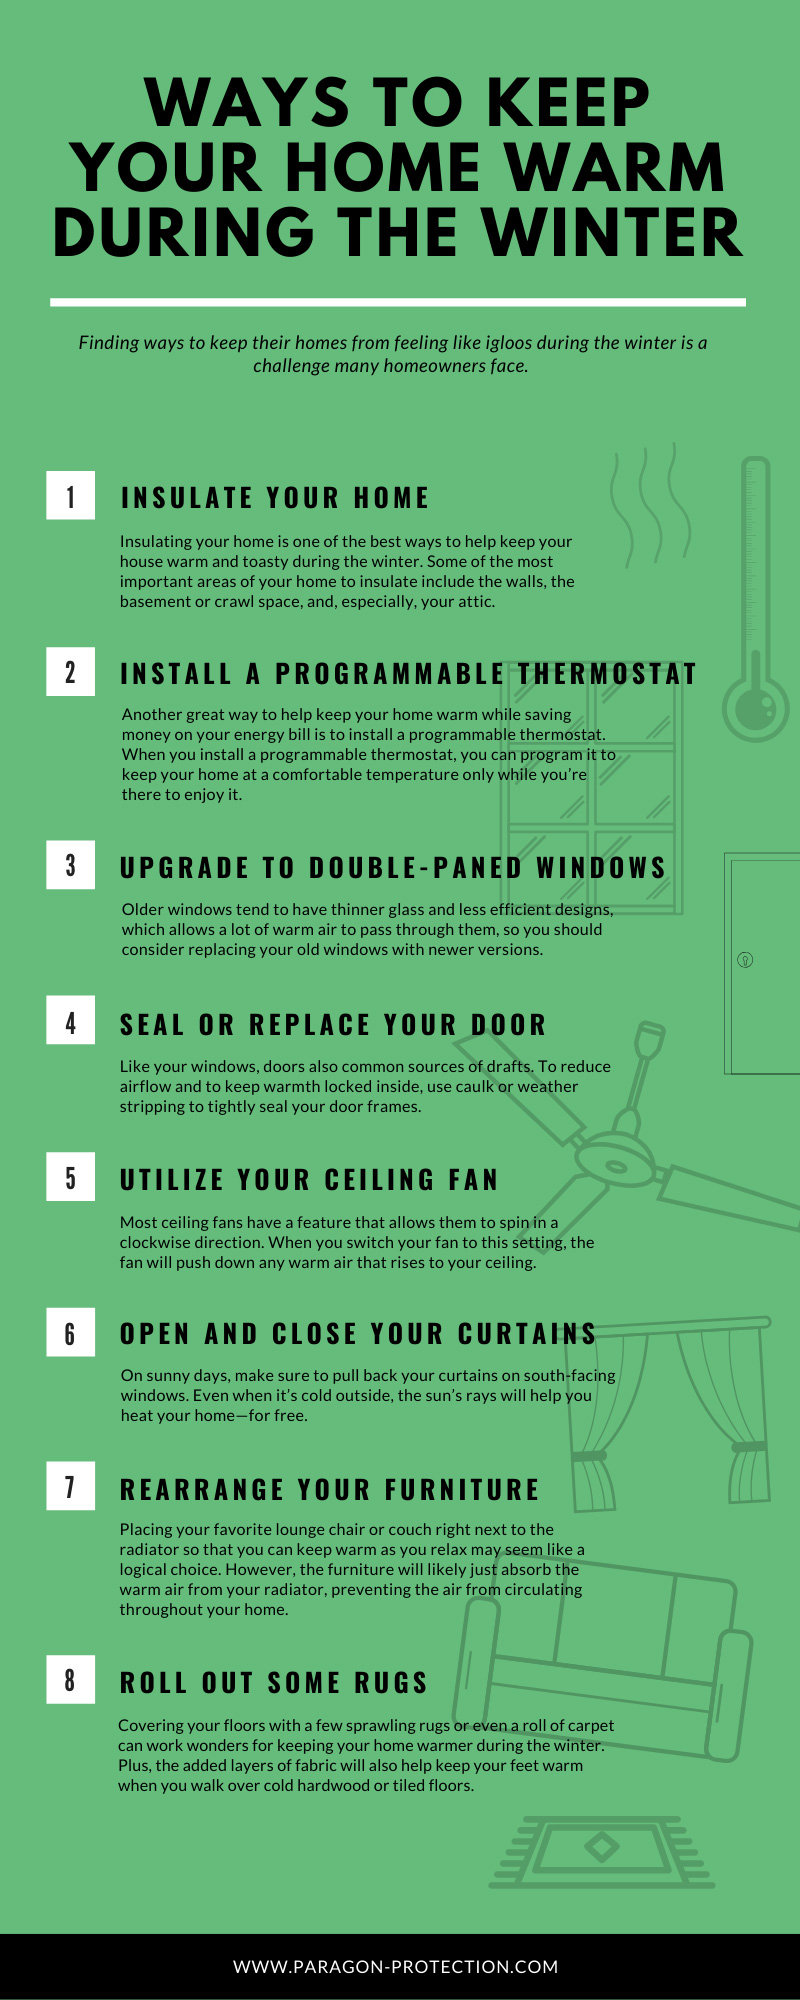 Ways to Keep Your Home Warm During the Winter infographic